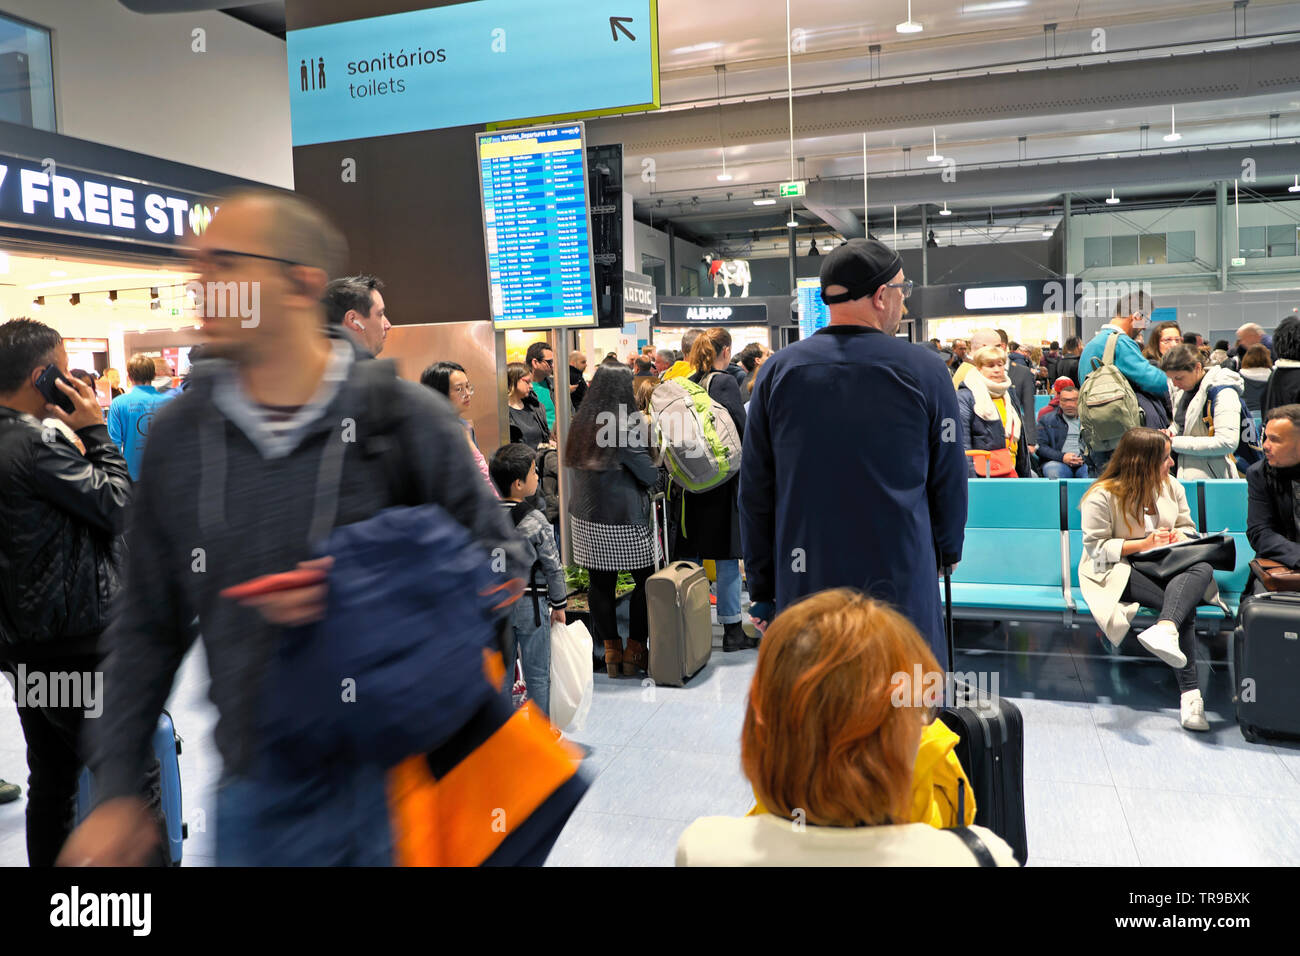 Passengers preparing waiting for flights looking at electronic display board in Lisbon airport departure lounge in April 2019 Lisboa, Portugal Europe Stock Photo